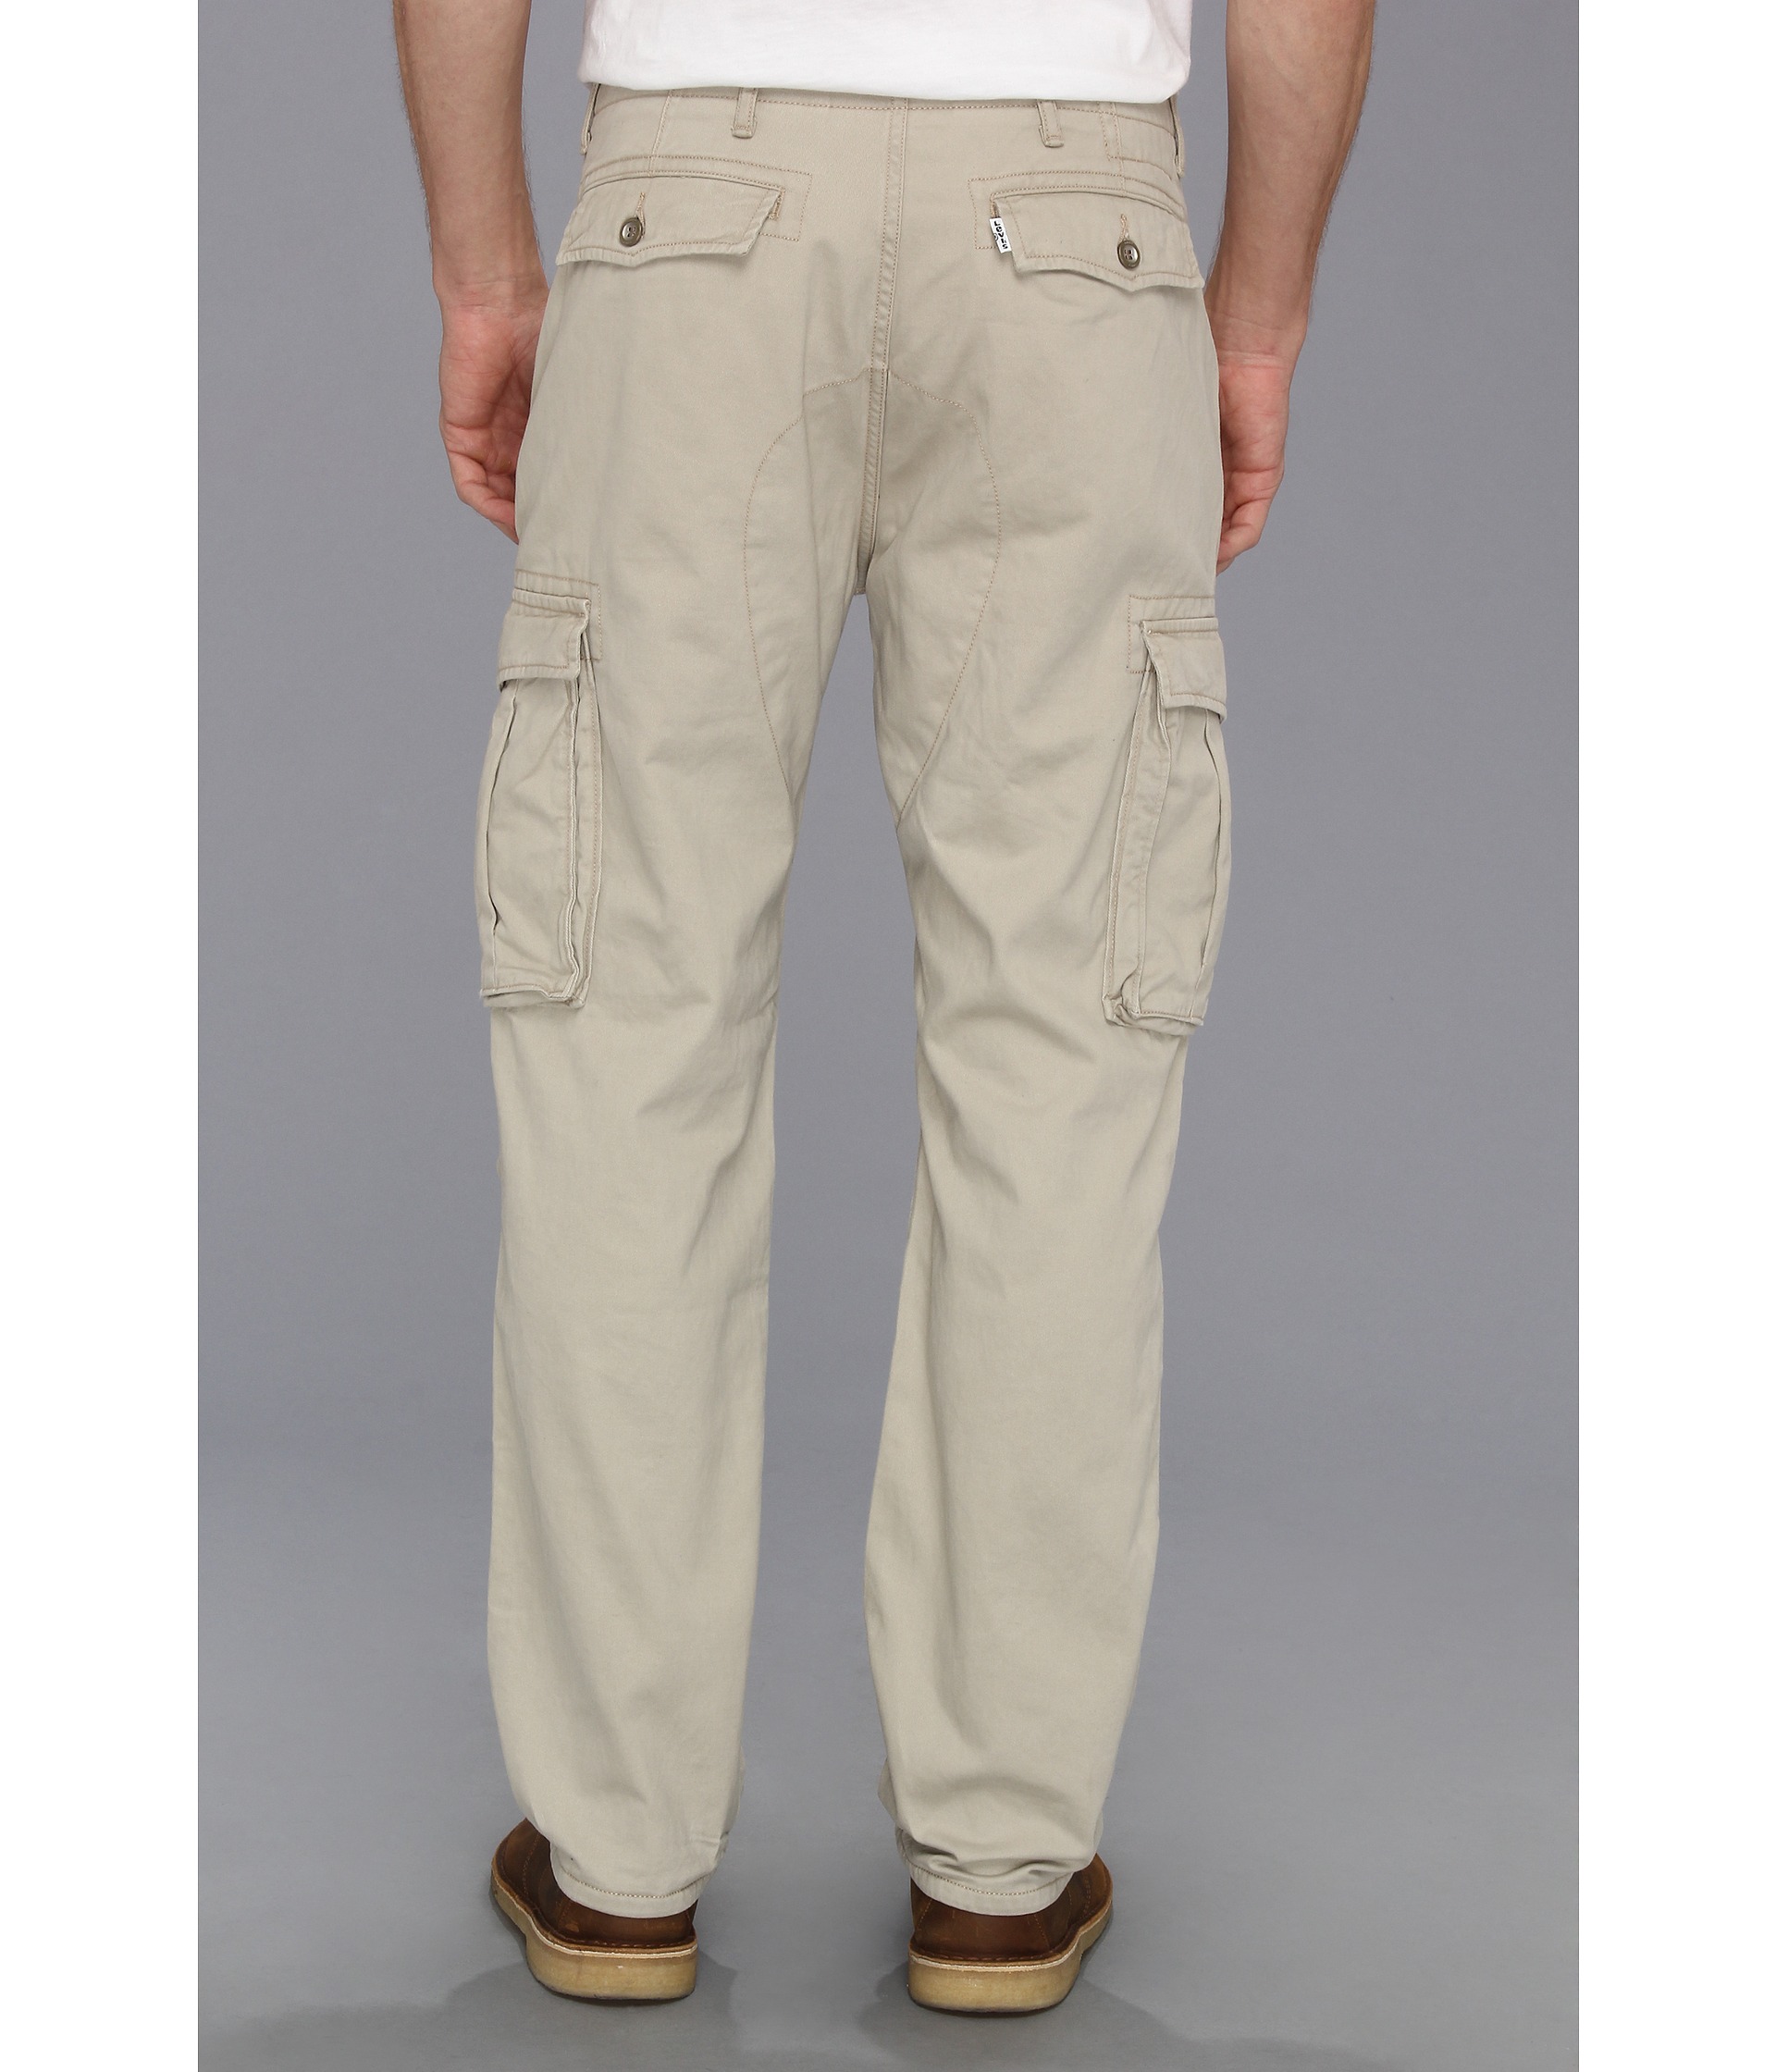 Levis Mens Contrast Cargo Pant | Shipped Free at Zappos